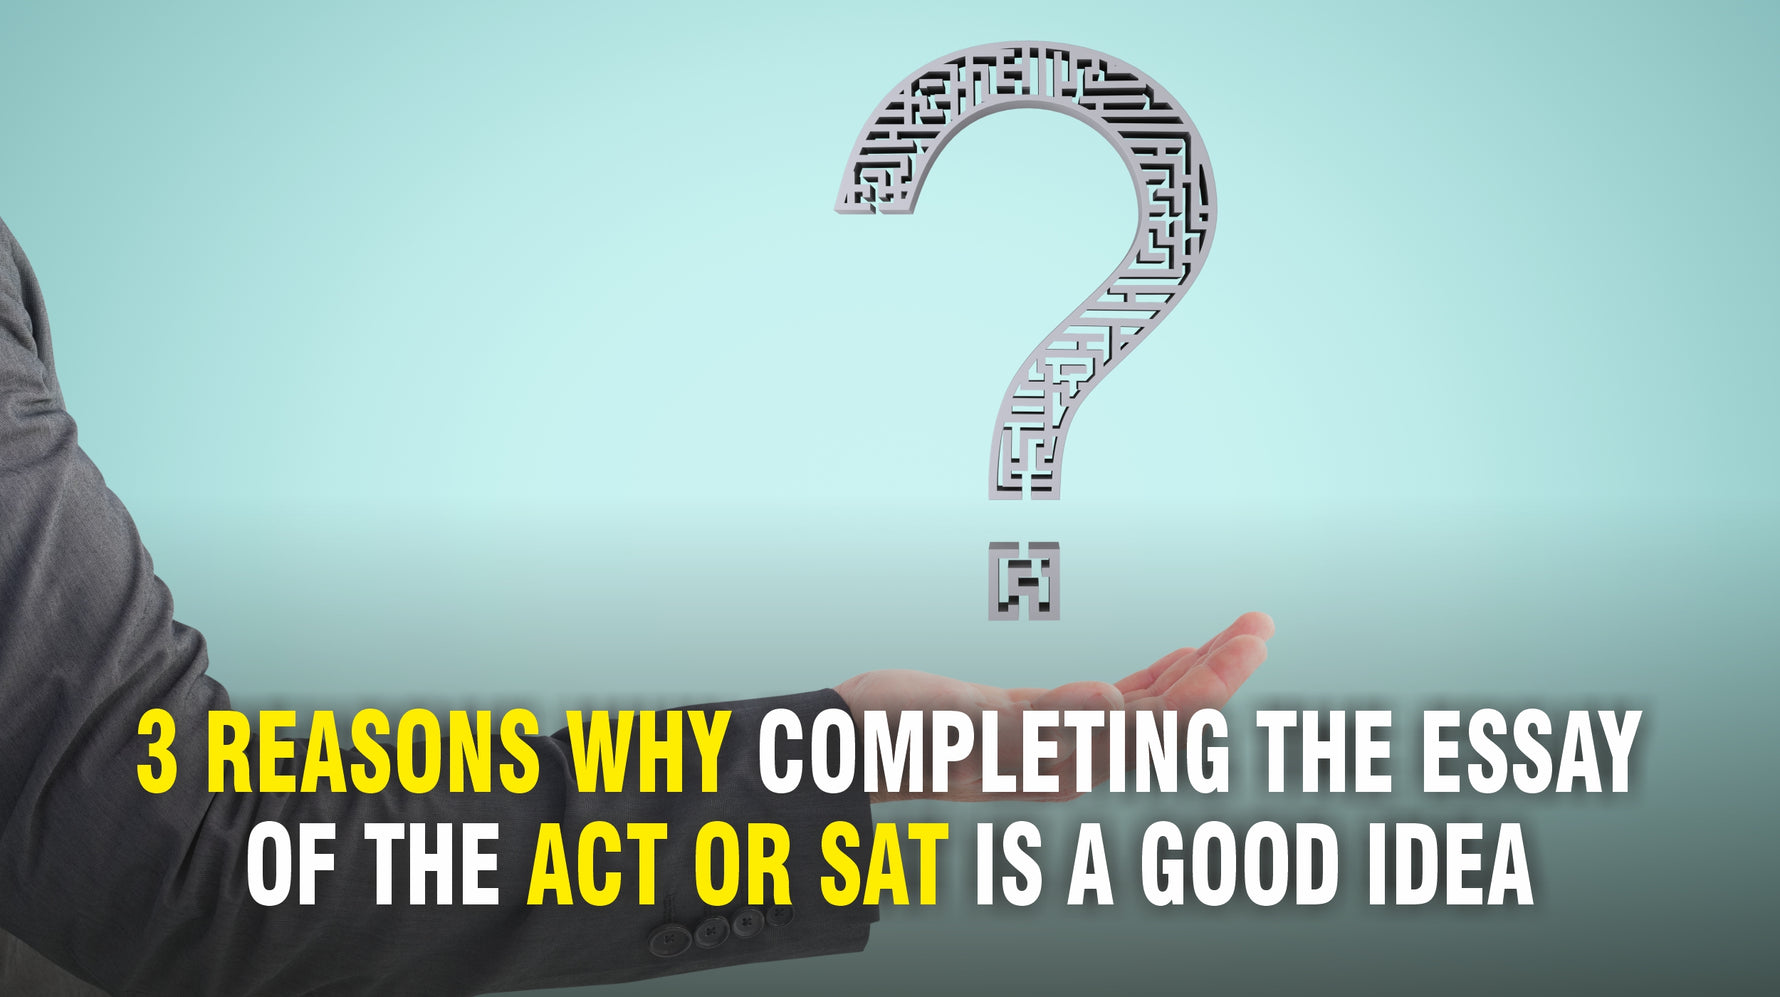 3 Reasons why completing the essay of the ACT or SAT is a good idea